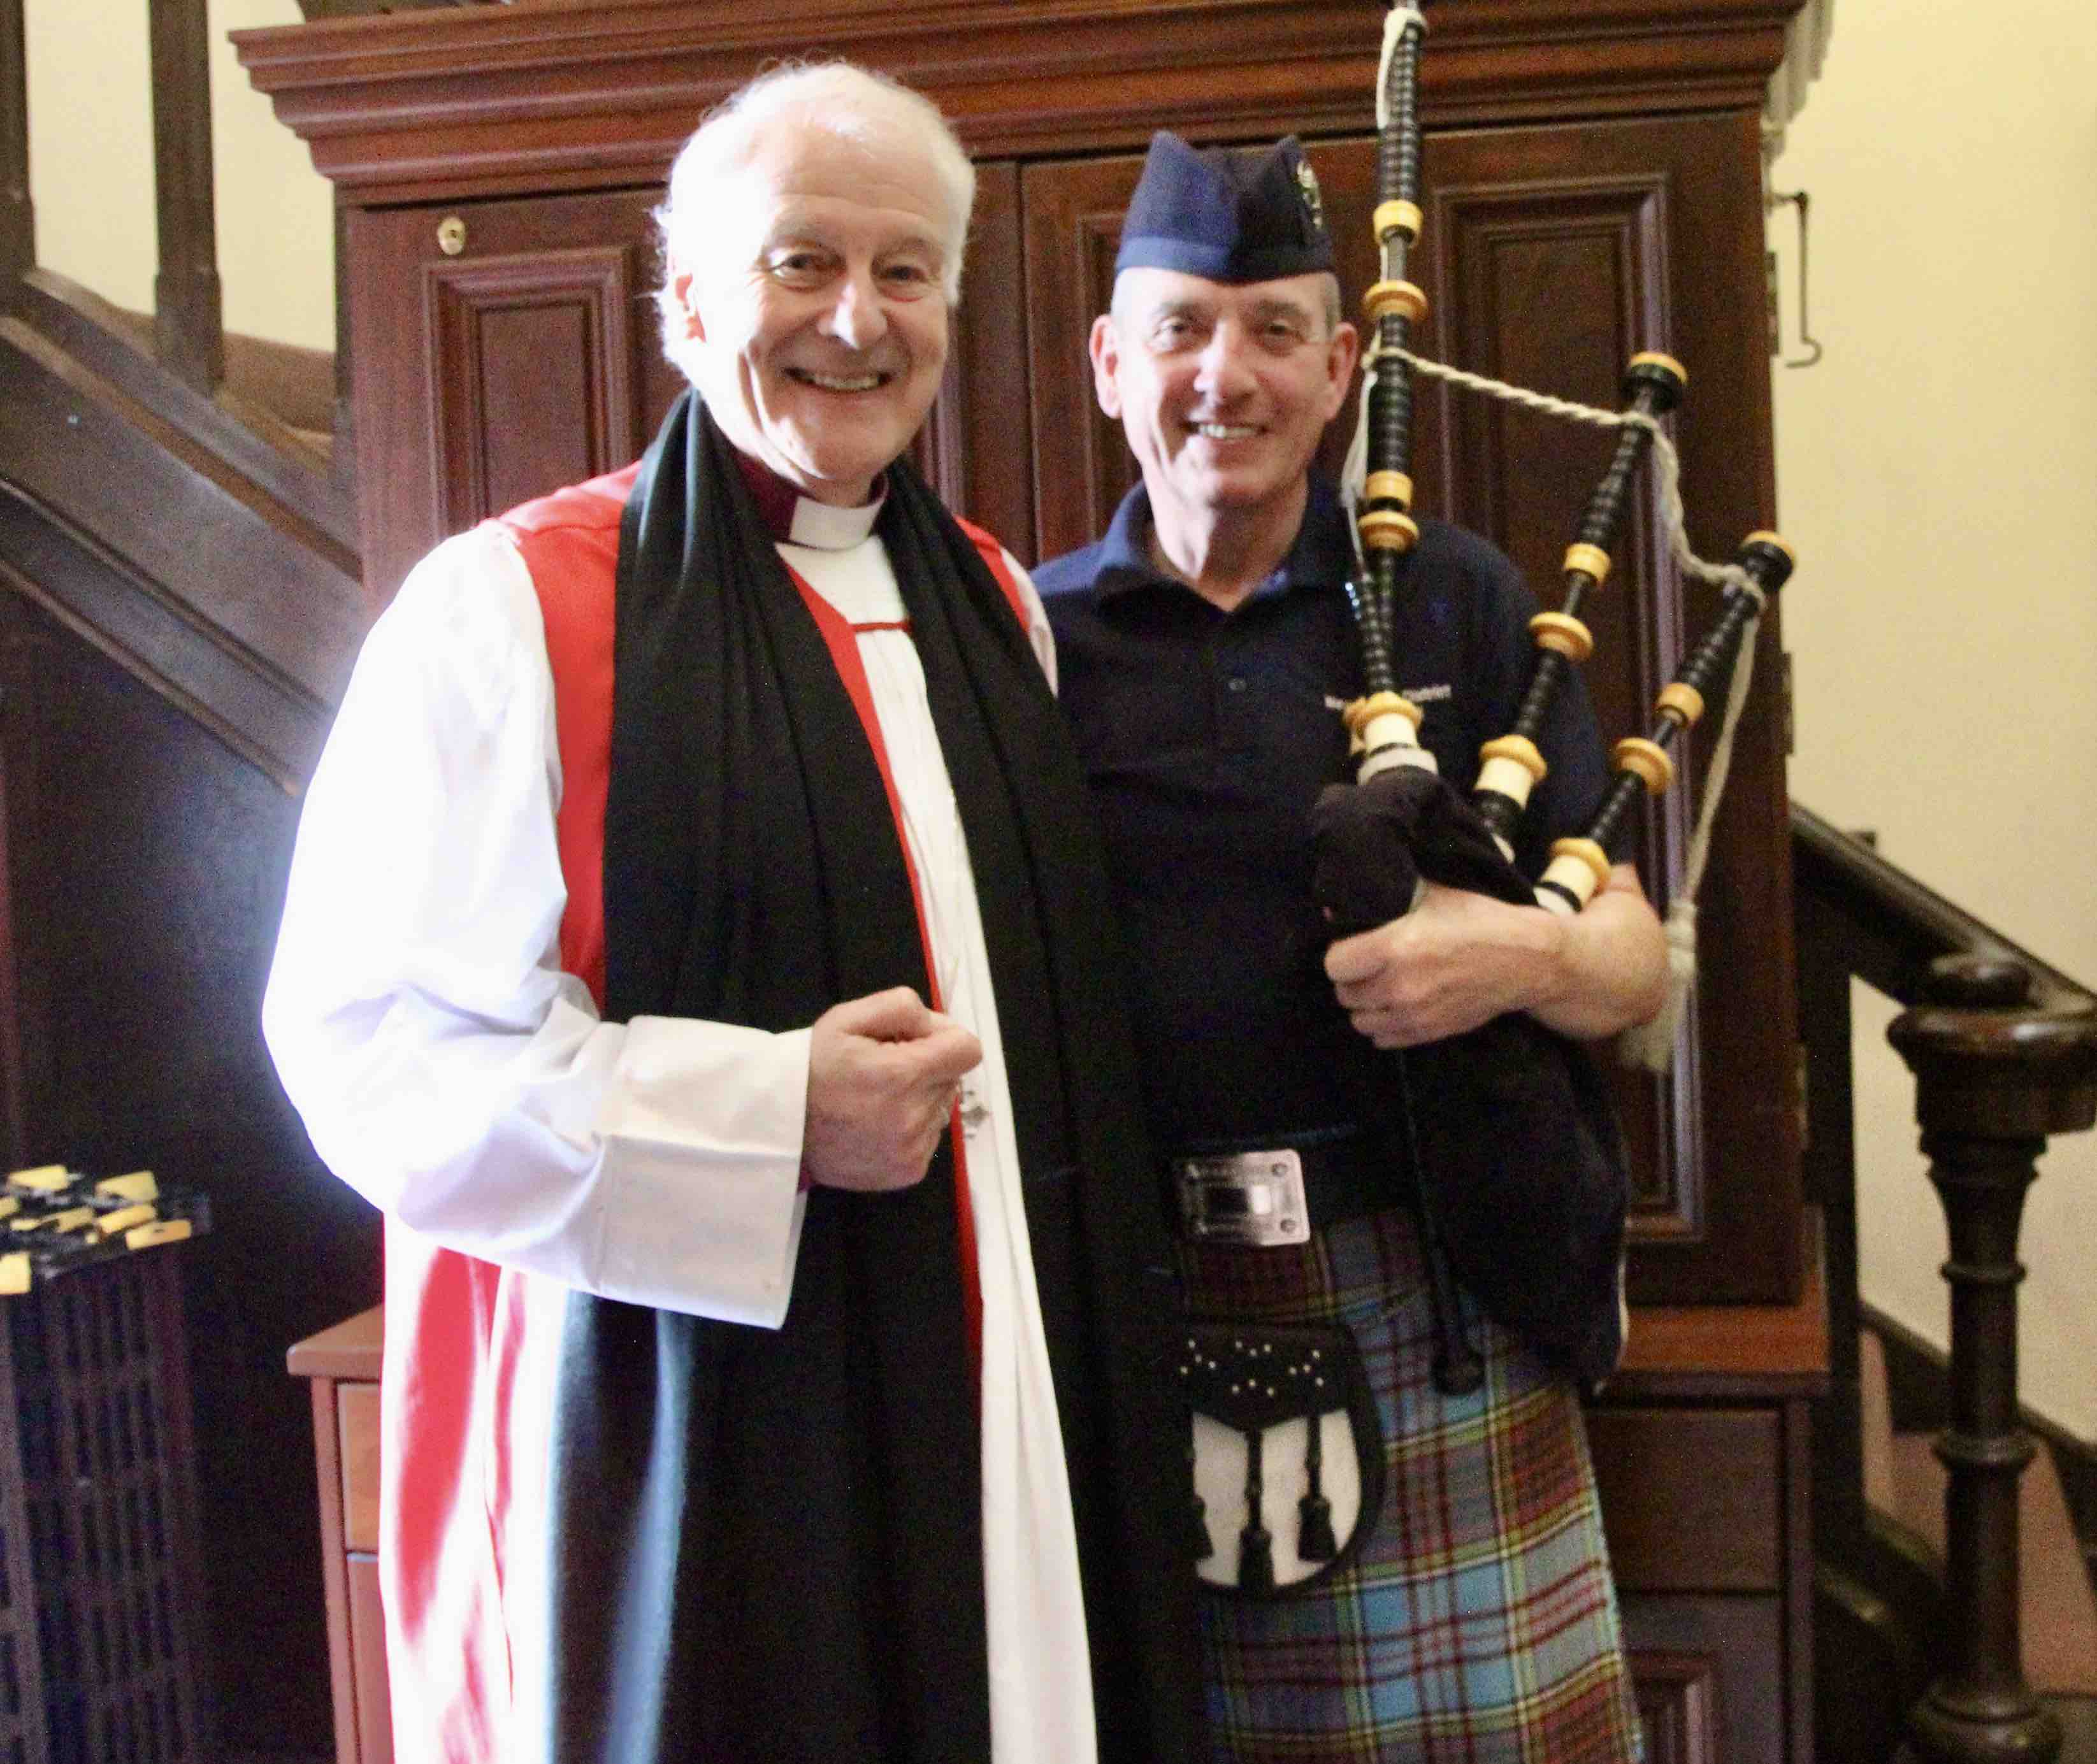 Archbishop Michael Jackson with Professor Ciaran MacMurchaidh who wrote and played the lament at the beginning of the service.